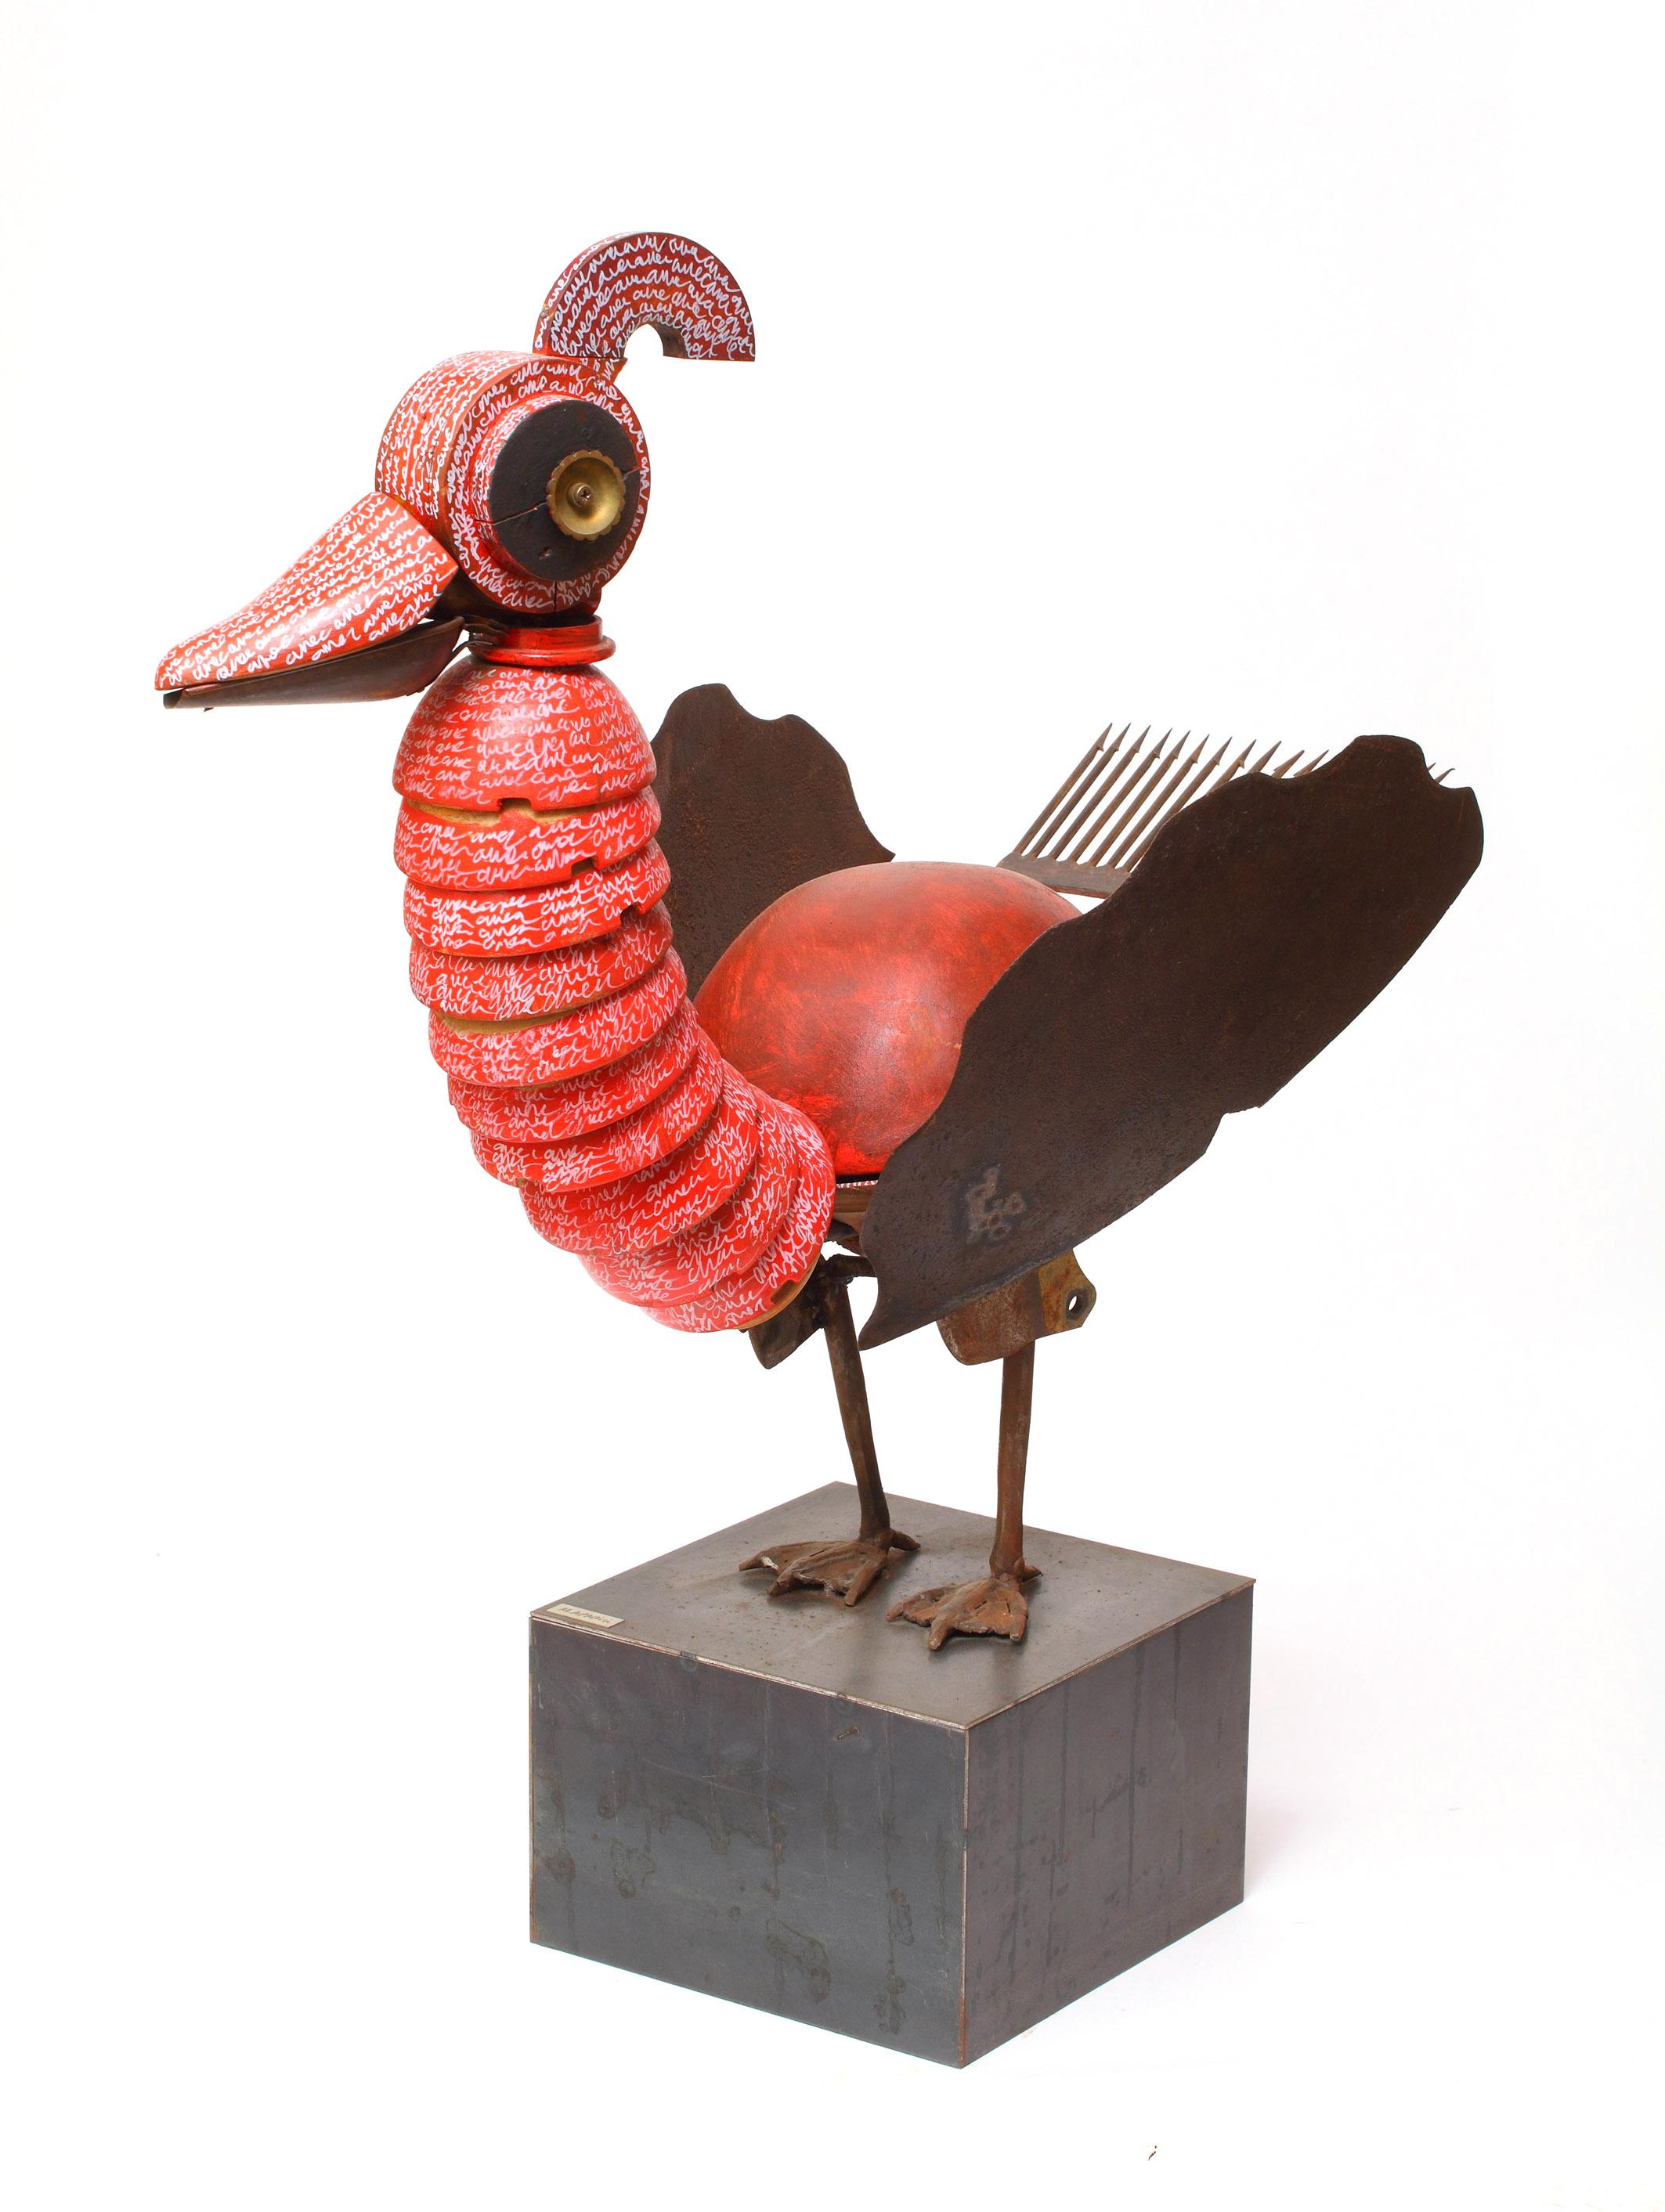 Miquel Aparici Figurative Sculpture - Pájaro Chino - 21st Cent, Contemporary Sculpture, Figurative, Recycled Objects